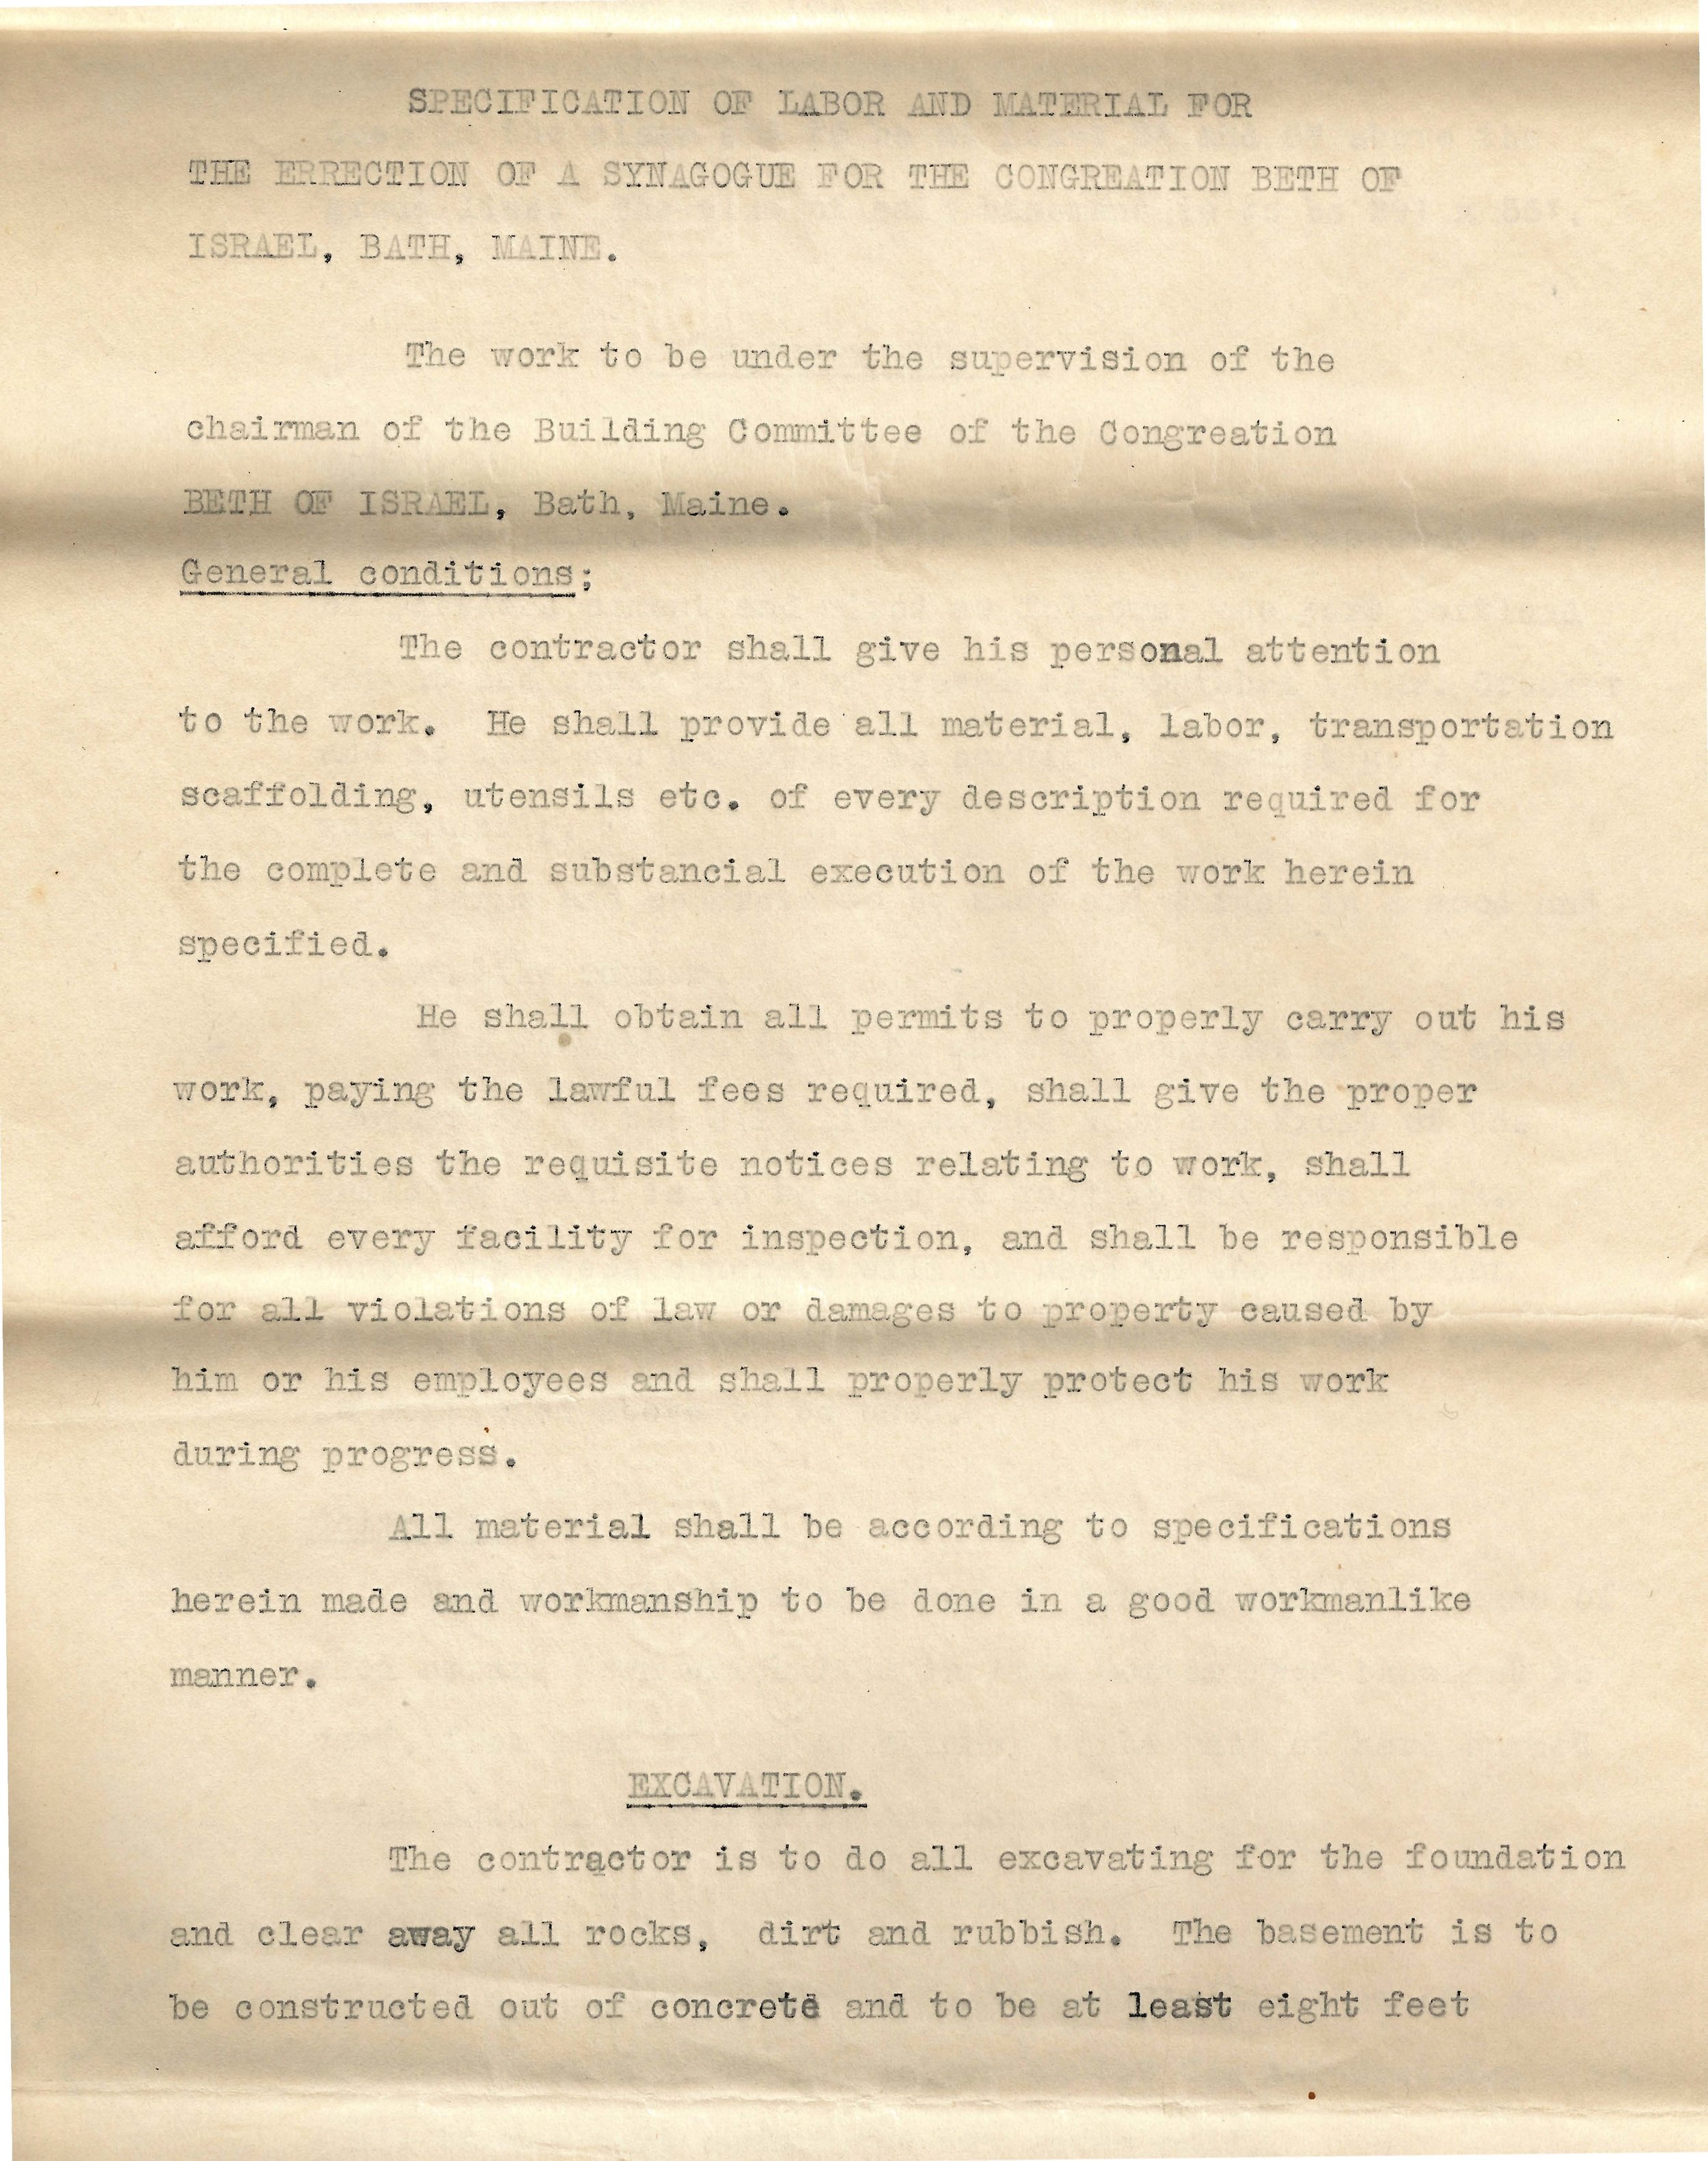 Contractor Agreement (1921)_Page_06.jpg